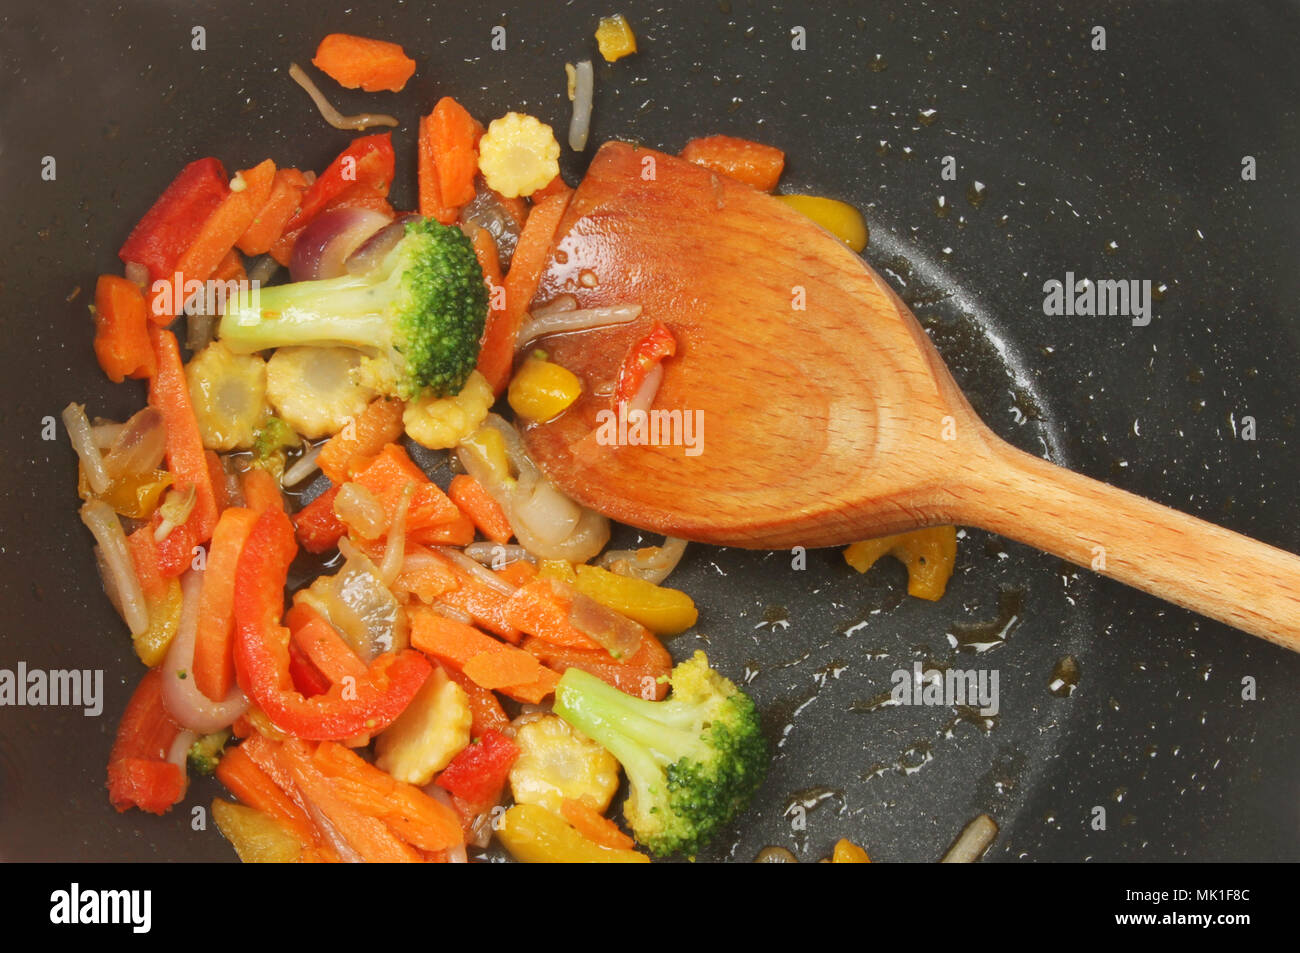 Closeup of stir fried vegetables in a wok with a wooden spoon Stock Photo